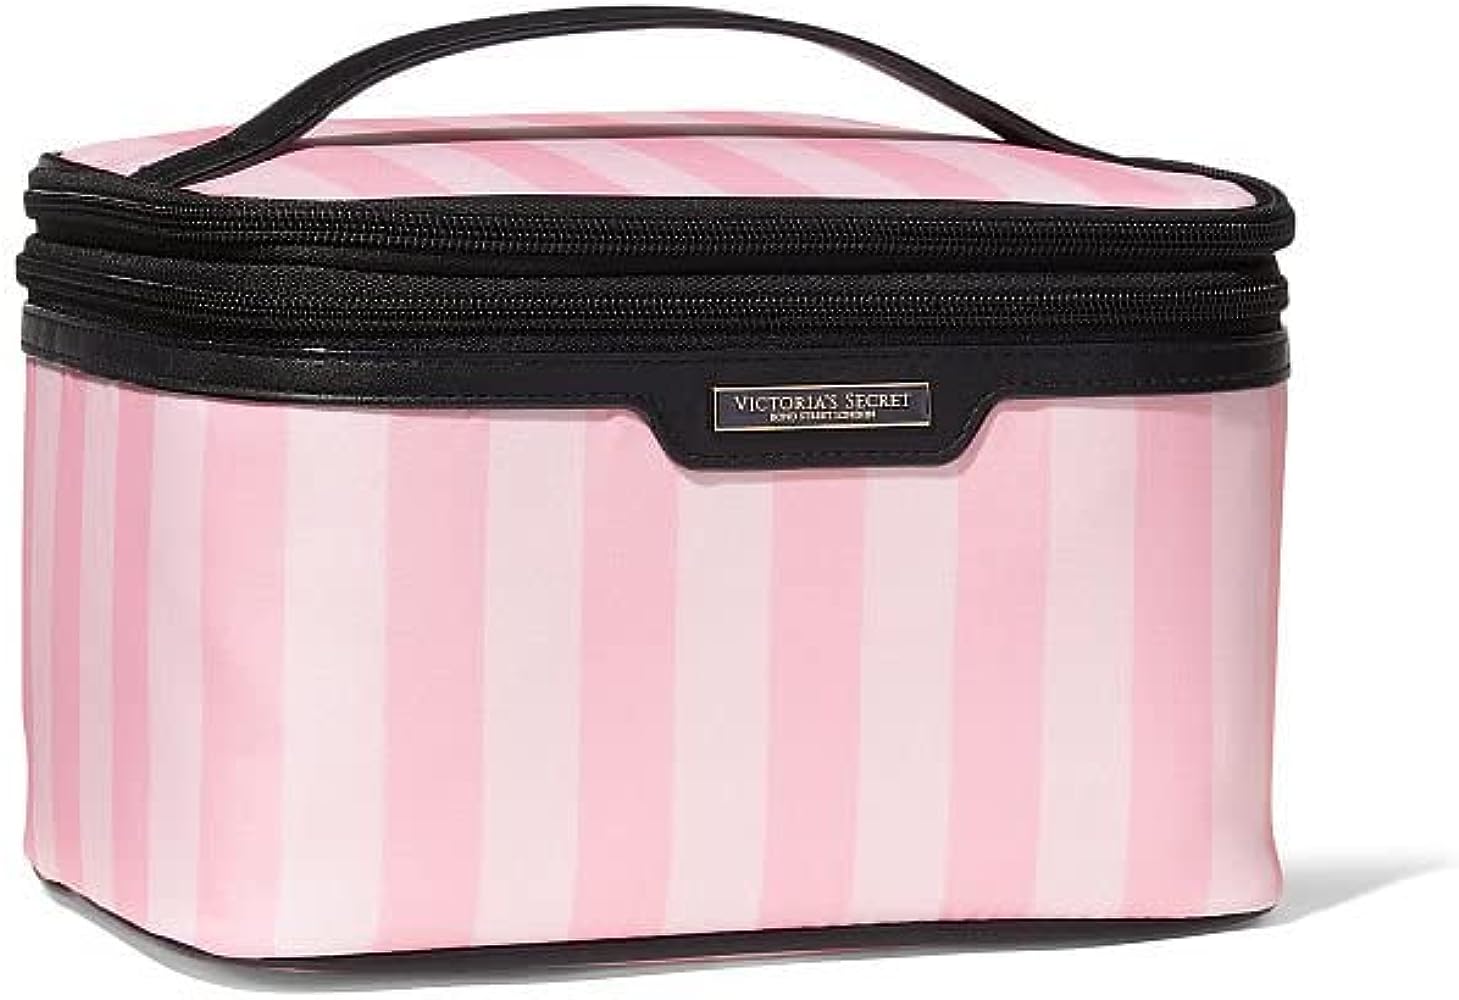 Wholesale Cosmetic Cases & Travel Bags - Free Shipping